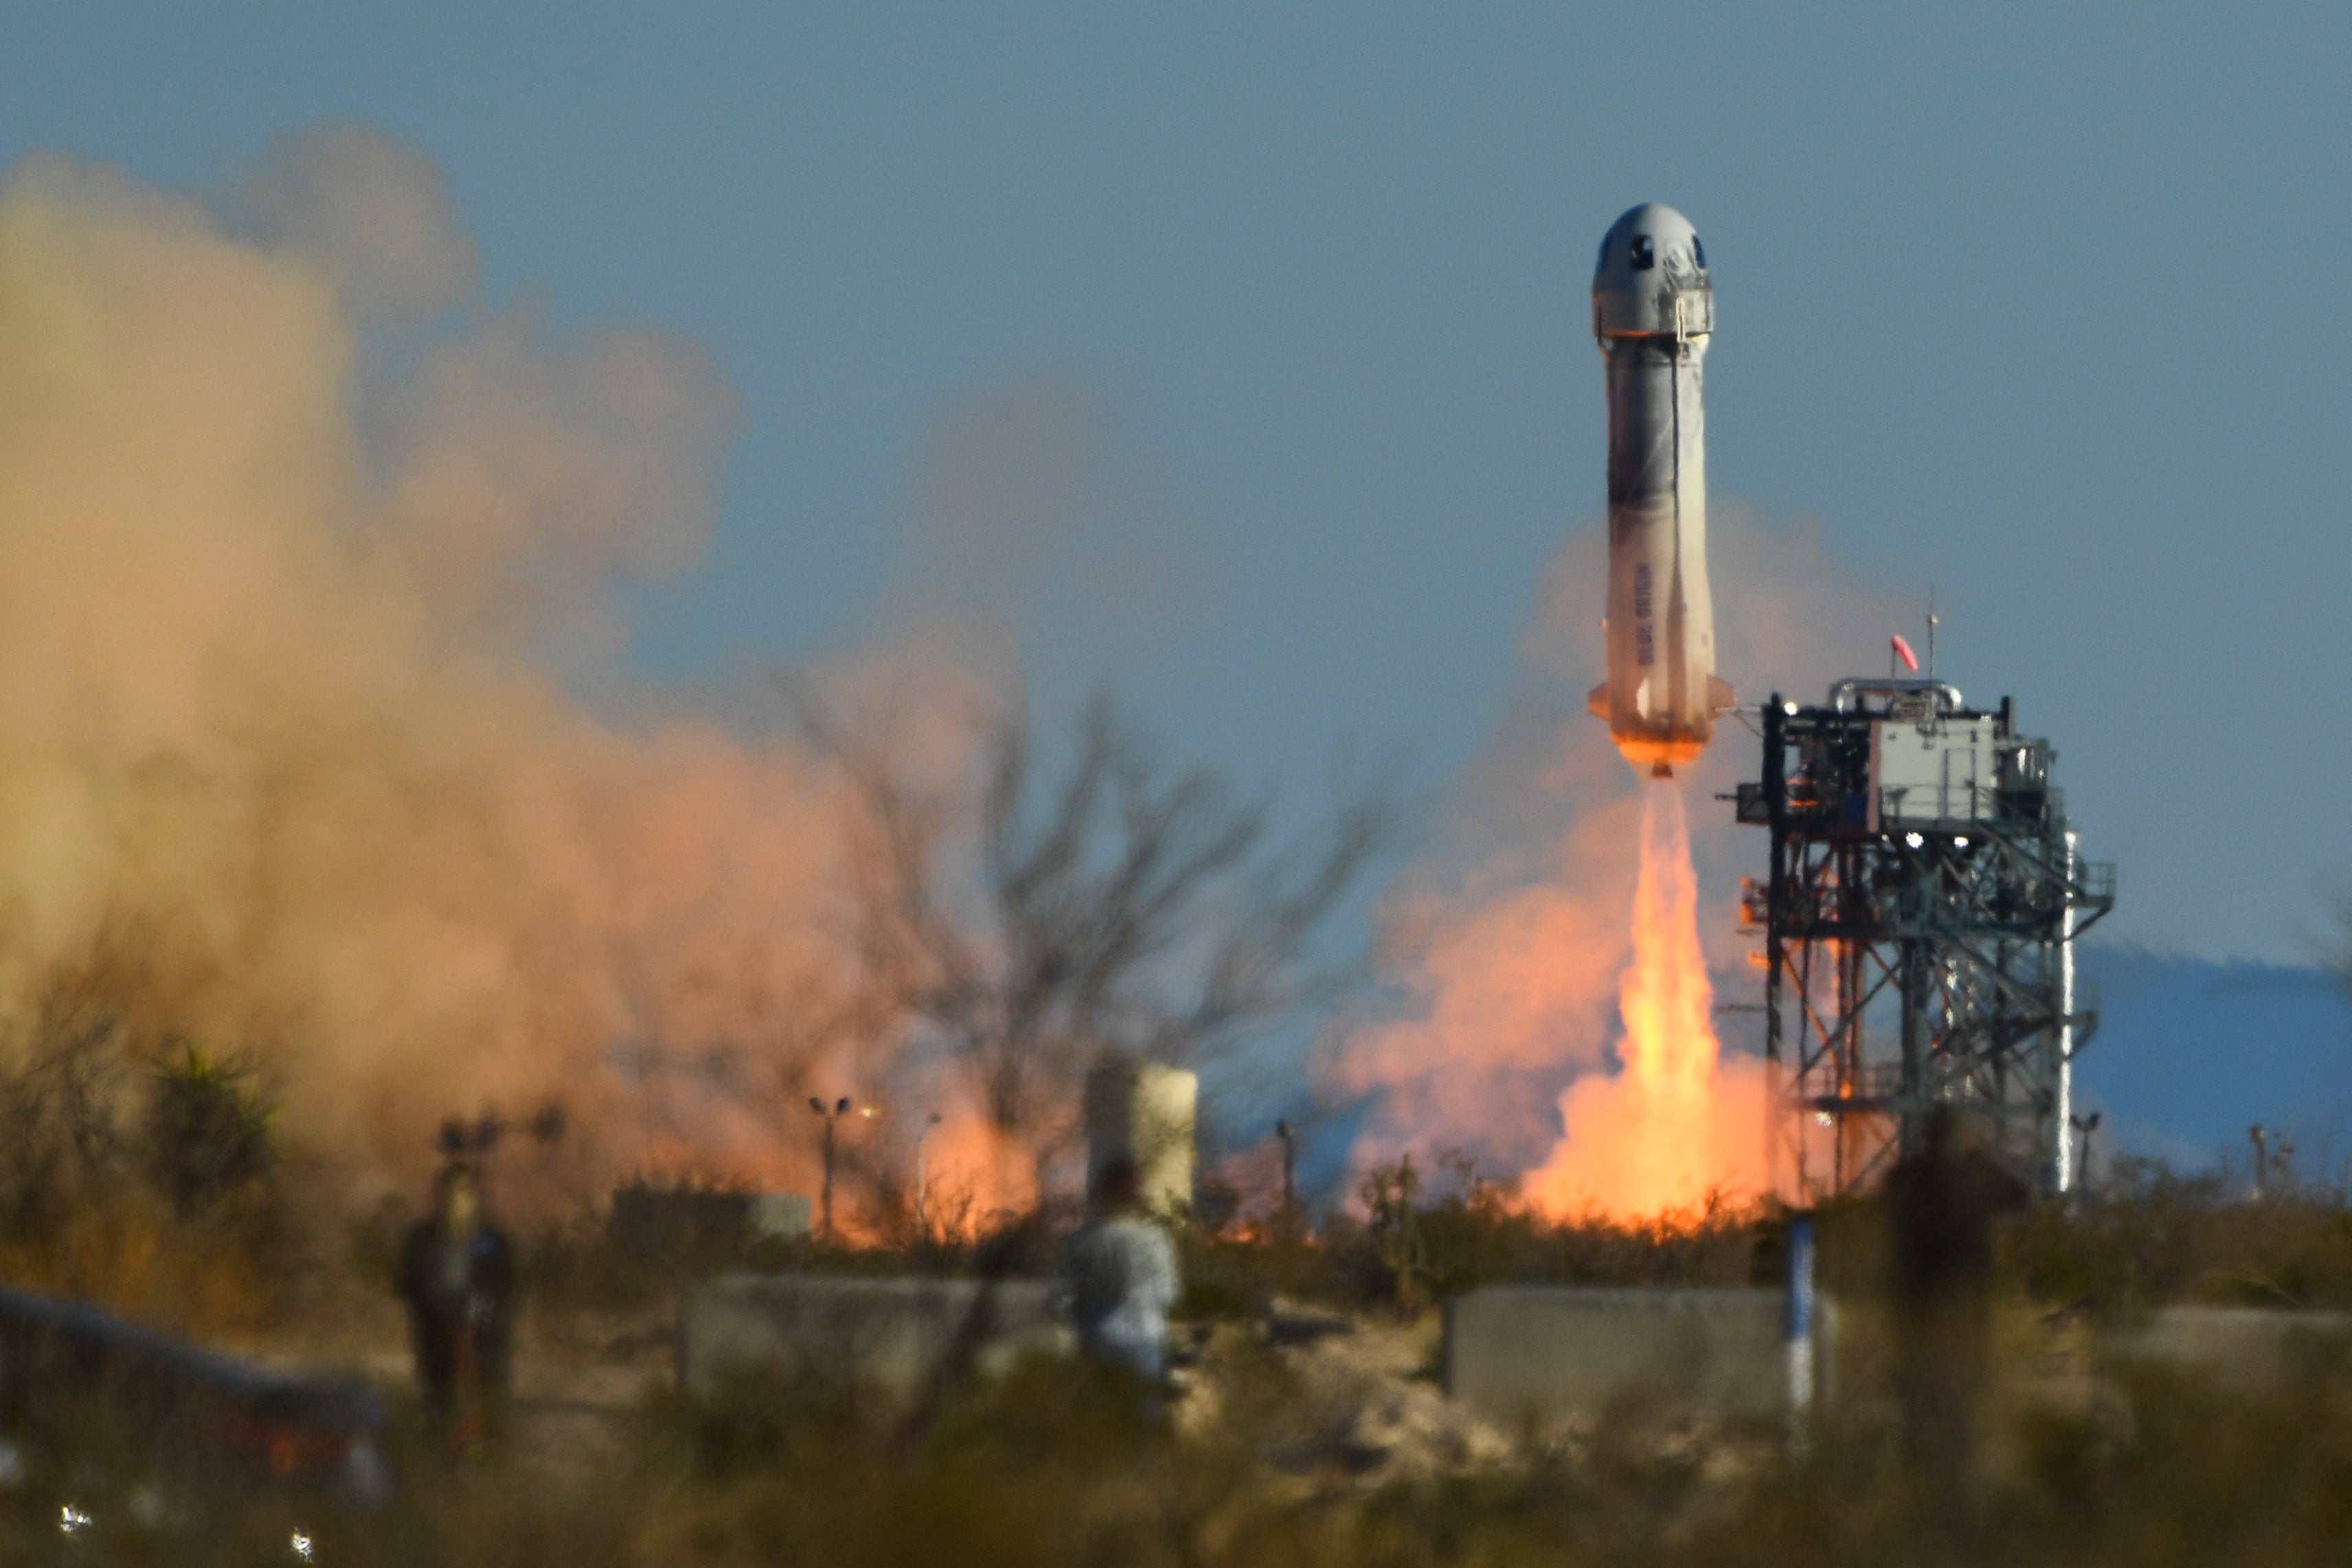 Blue Origin successfully completed NS-20, it’s fourth crewed space tourism flight, on Thursday, 31 March.